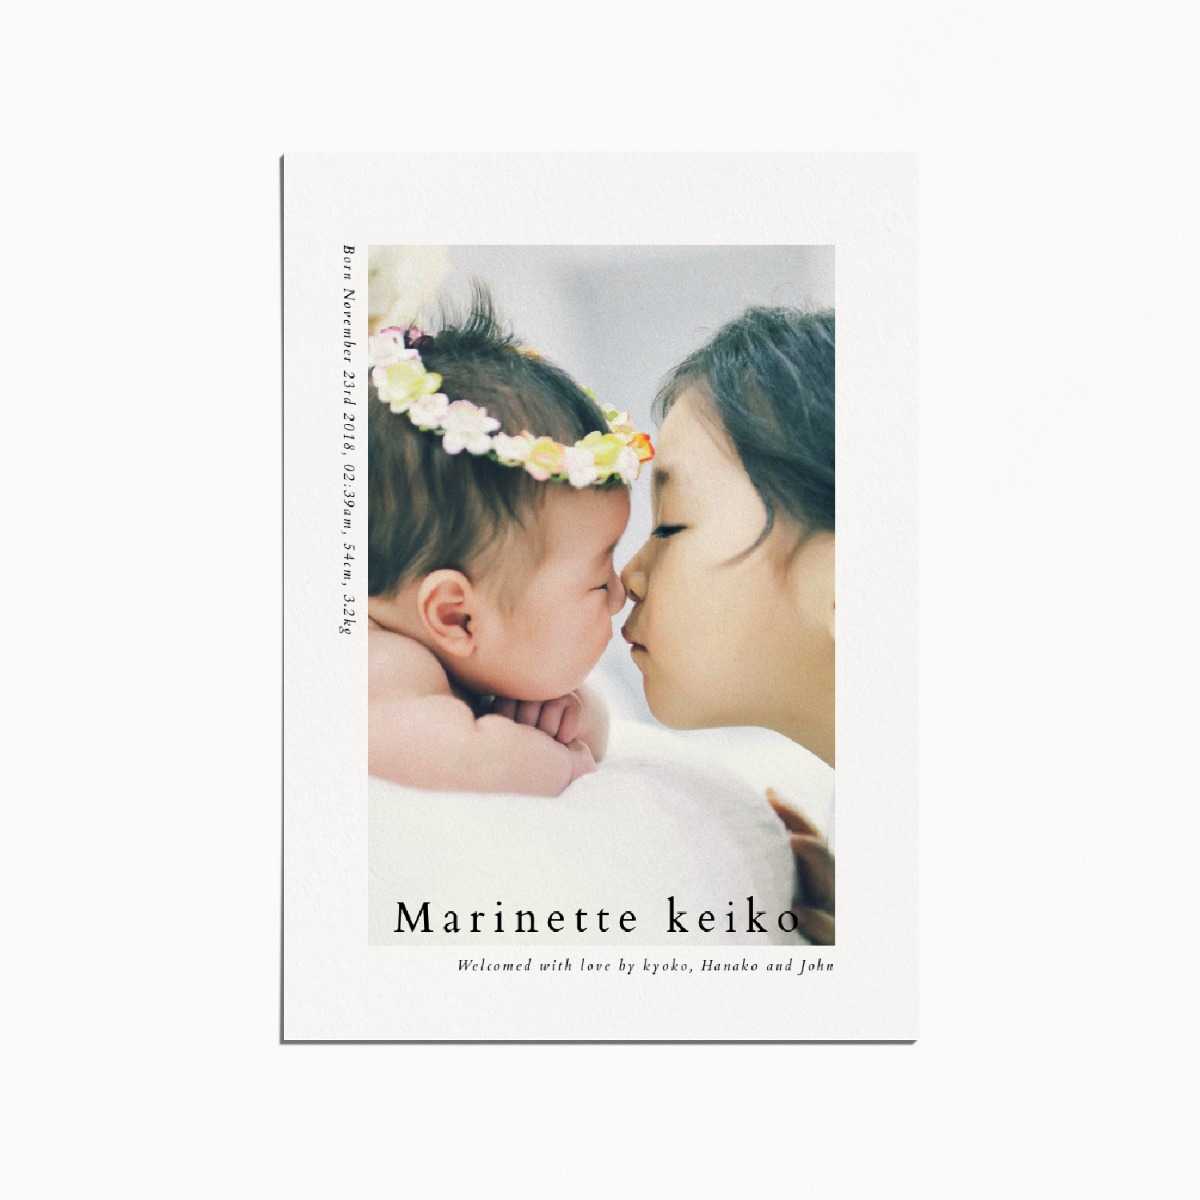 Birth announcement card with an image of a newborn baby and their older sister